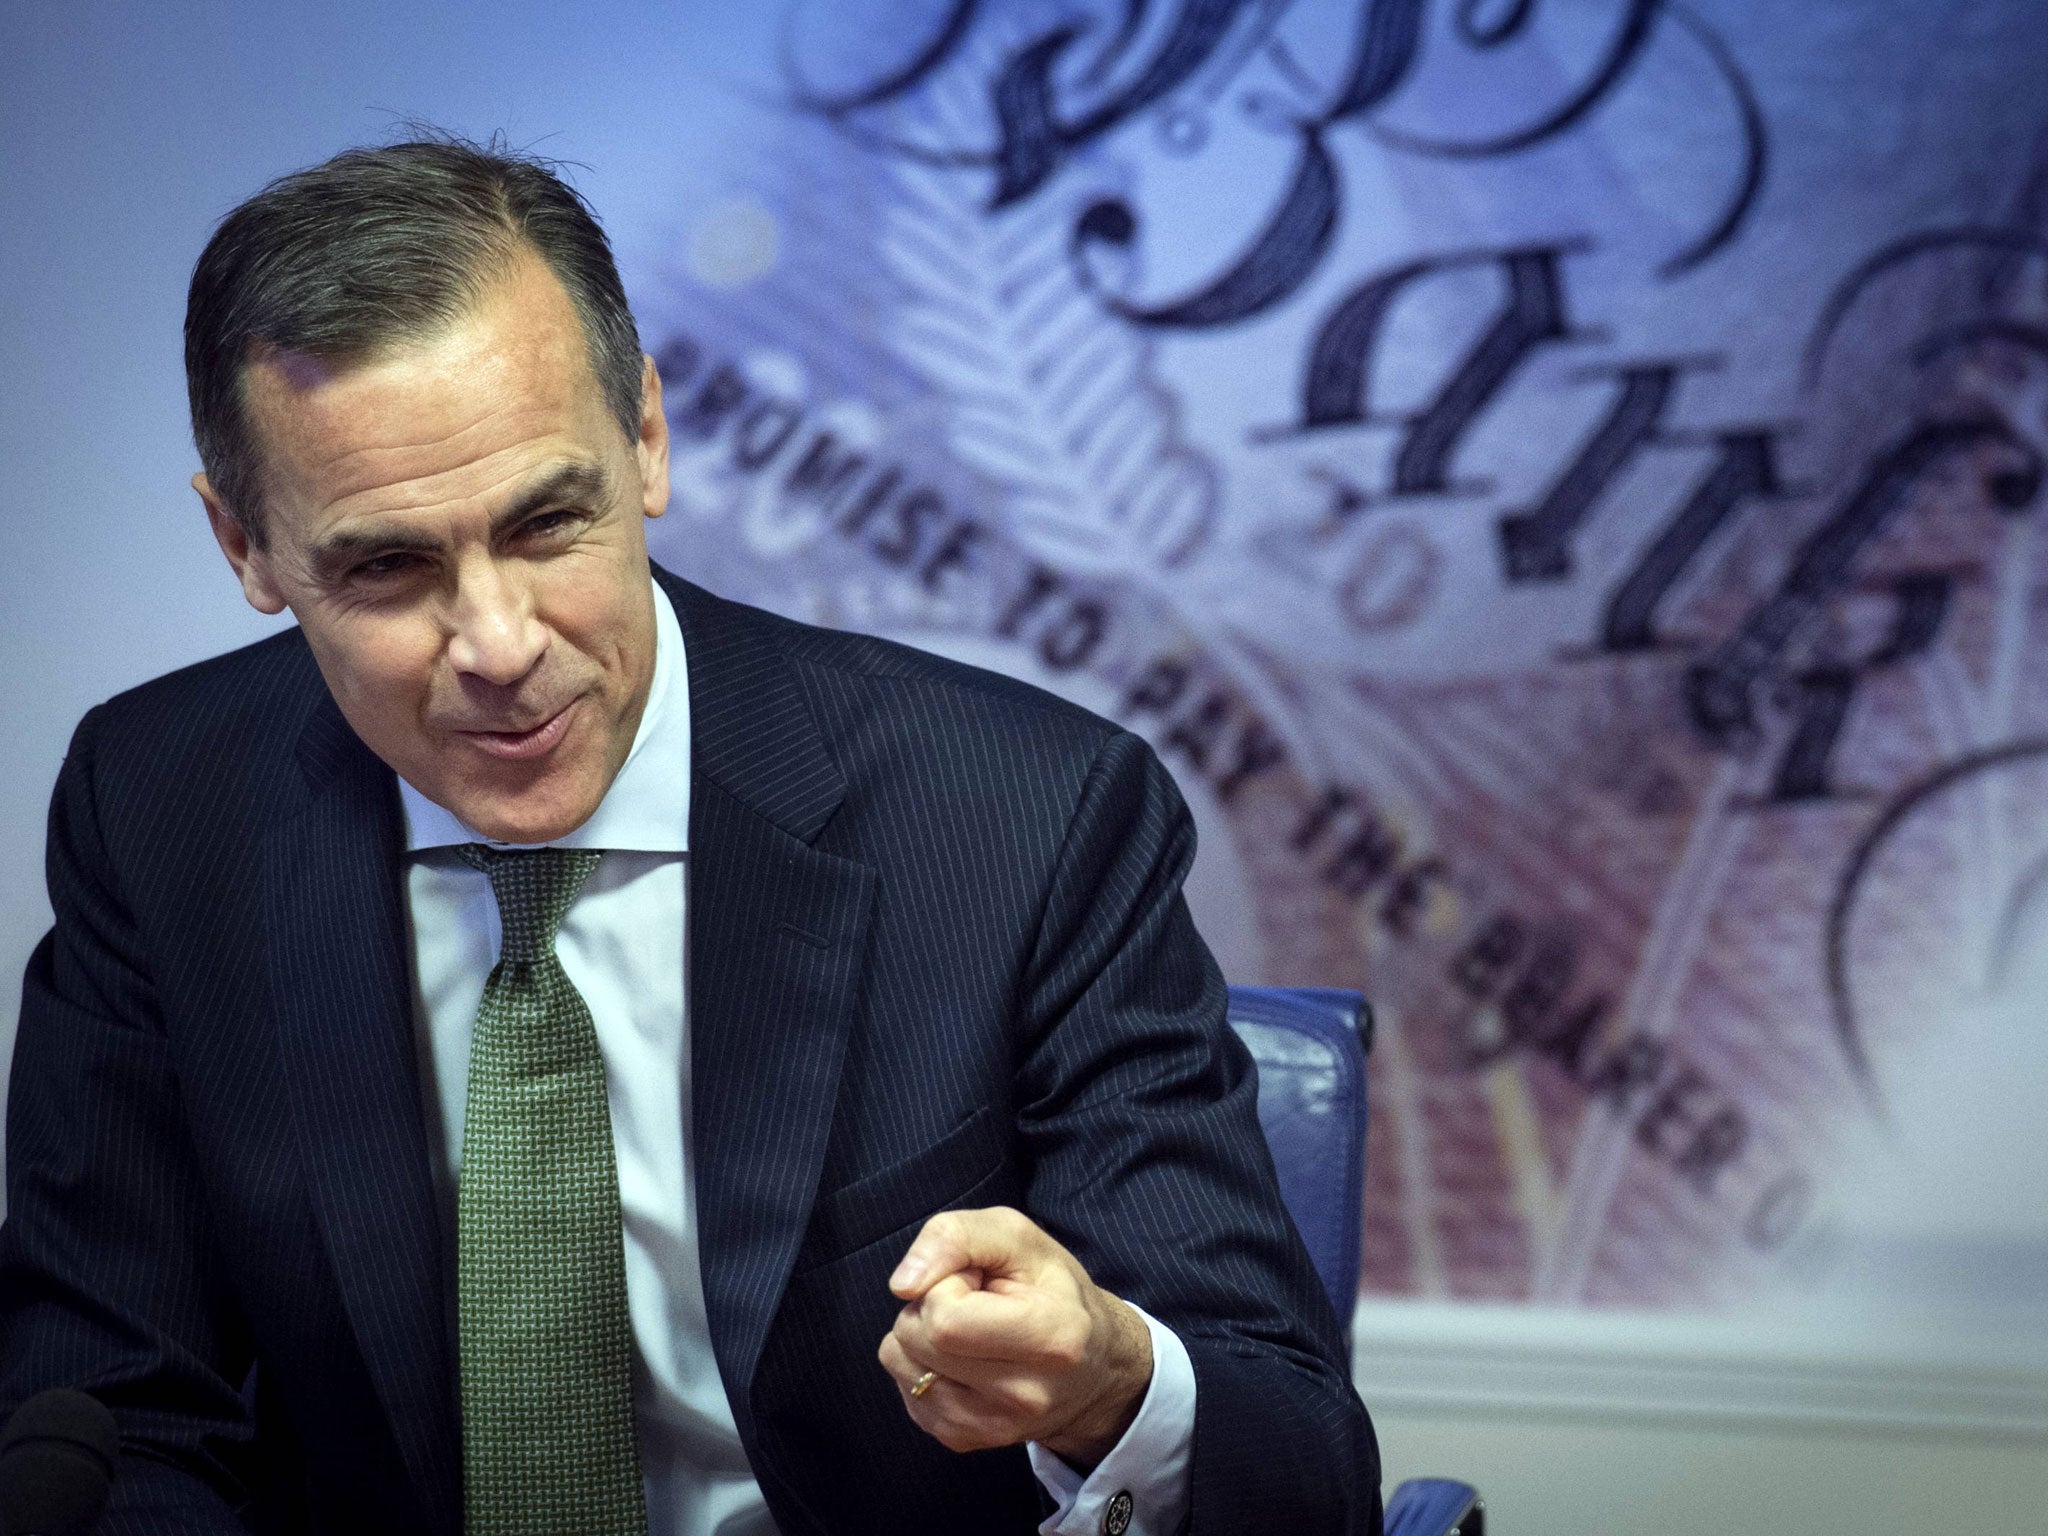 Mark Carney; '[there is] no immediate need to increase interest rates'